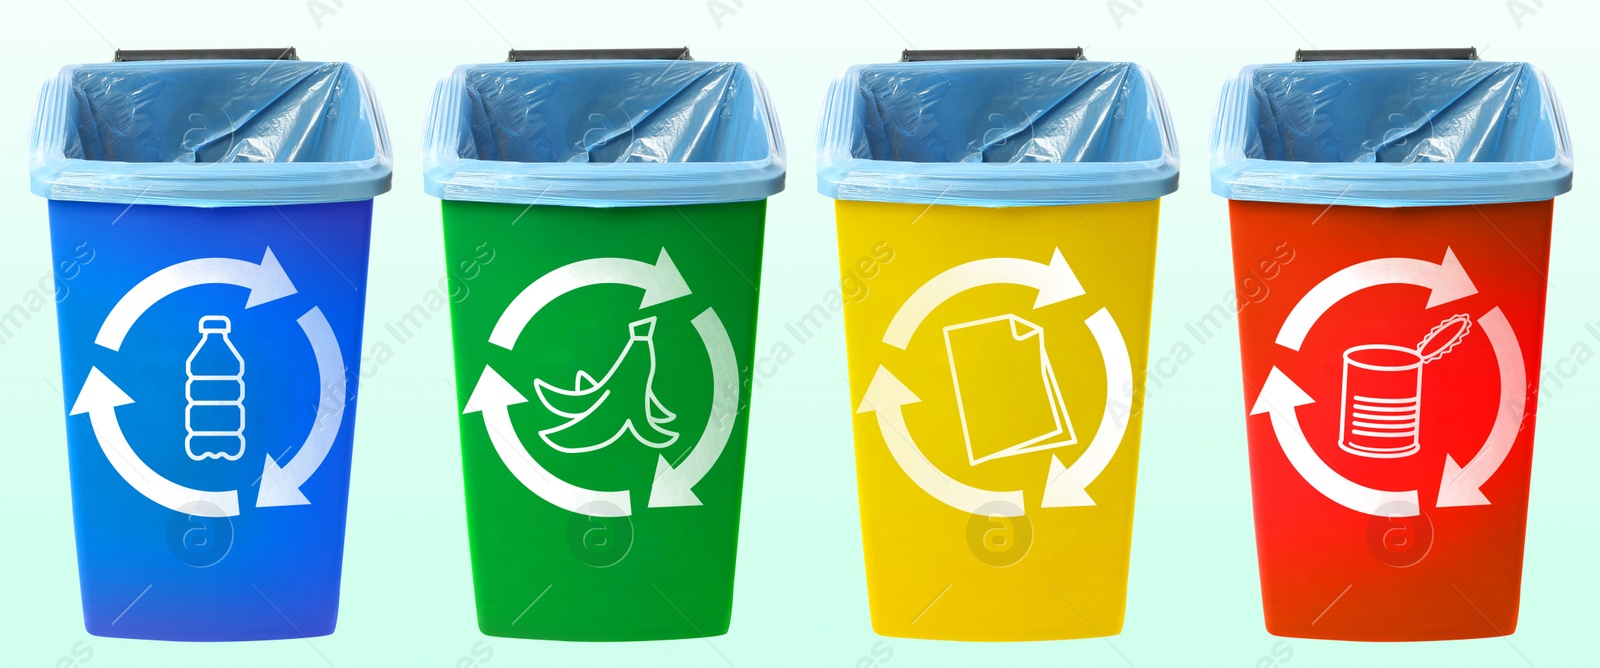 Image of Waste sorting, banner design. Recycling bins with illustrations of different garbage types on light background